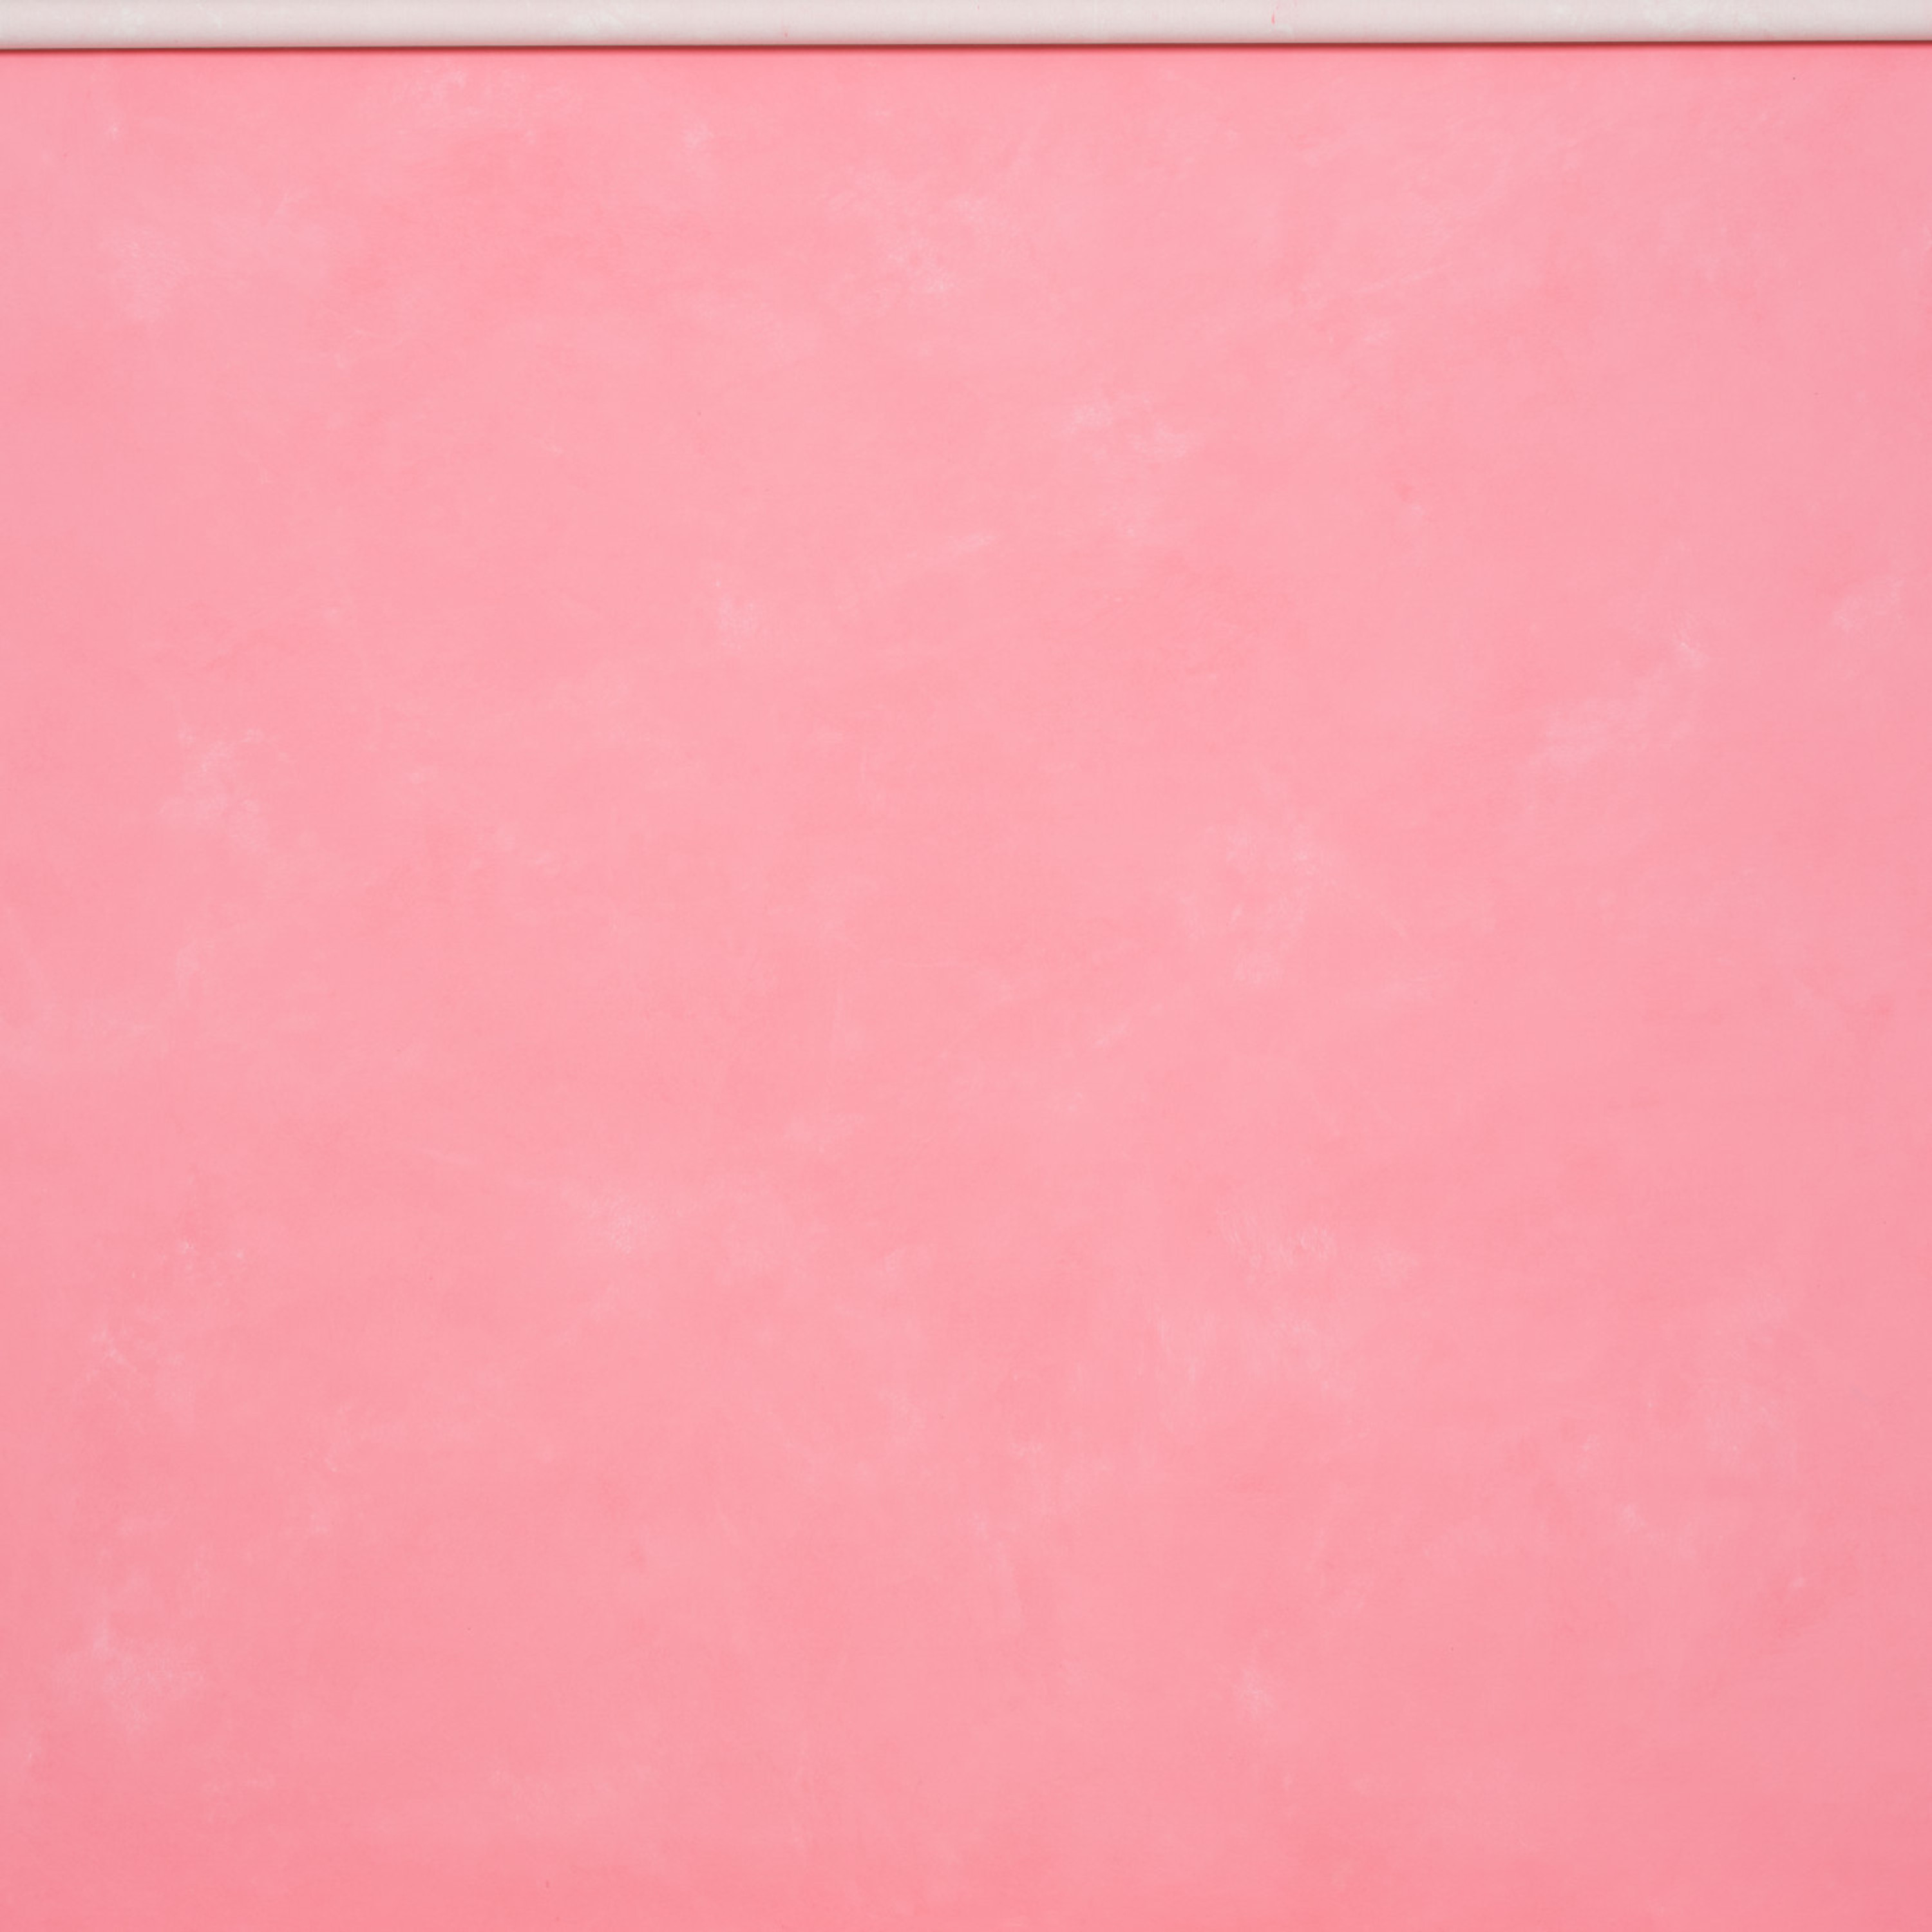 Gravity Backdrops Pink Low Texture LG